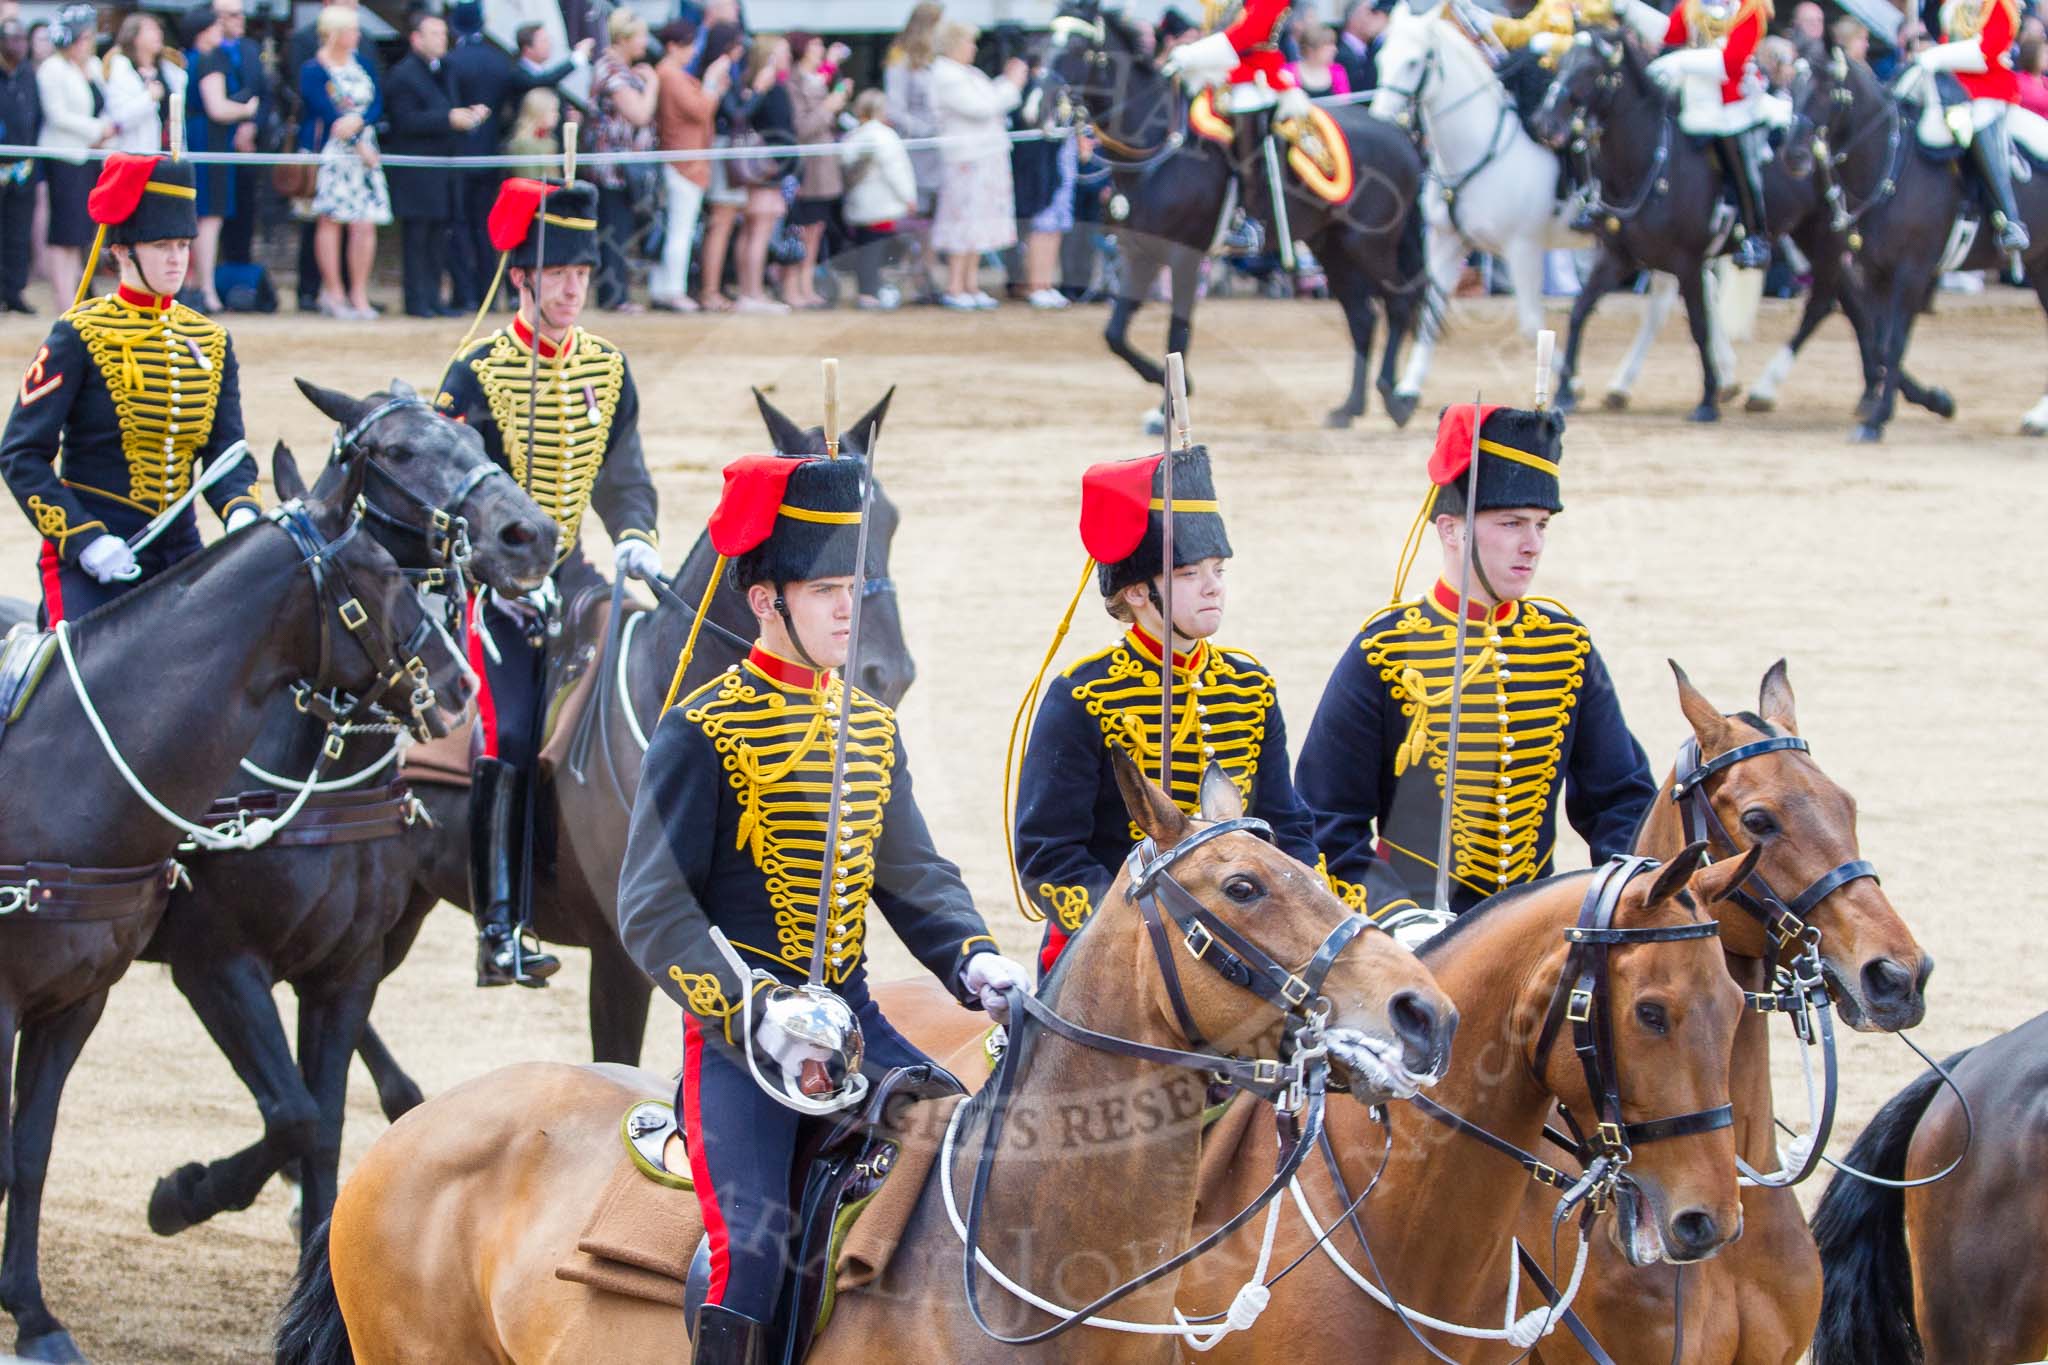 Trooping the Colour 2013: The Ride Past - the King's Troop Royal Horse Artillery. Image #725, 15 June 2013 11:58 Horse Guards Parade, London, UK